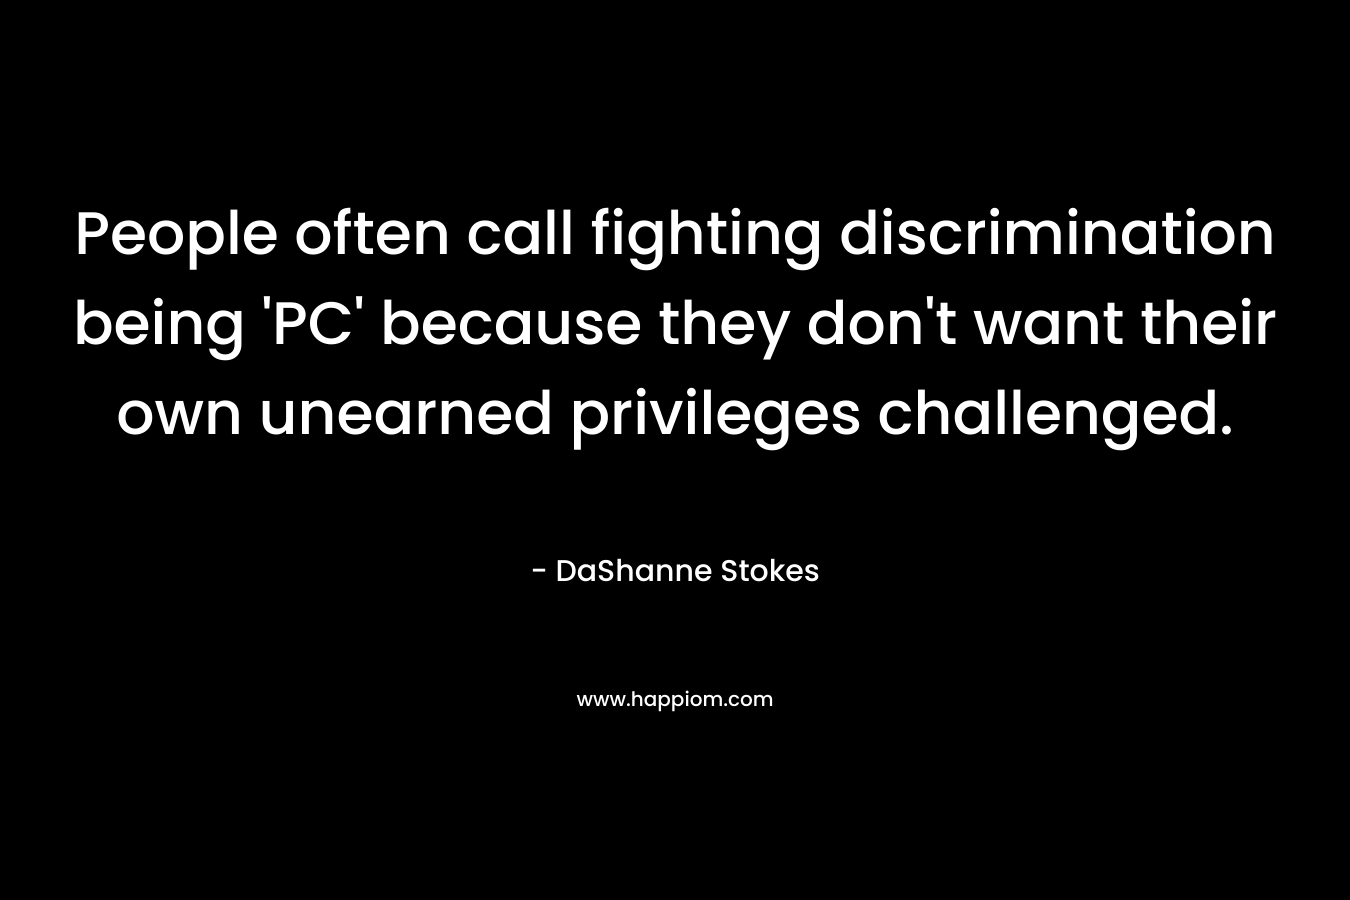 People often call fighting discrimination being ‘PC’ because they don’t want their own unearned privileges challenged. – DaShanne Stokes